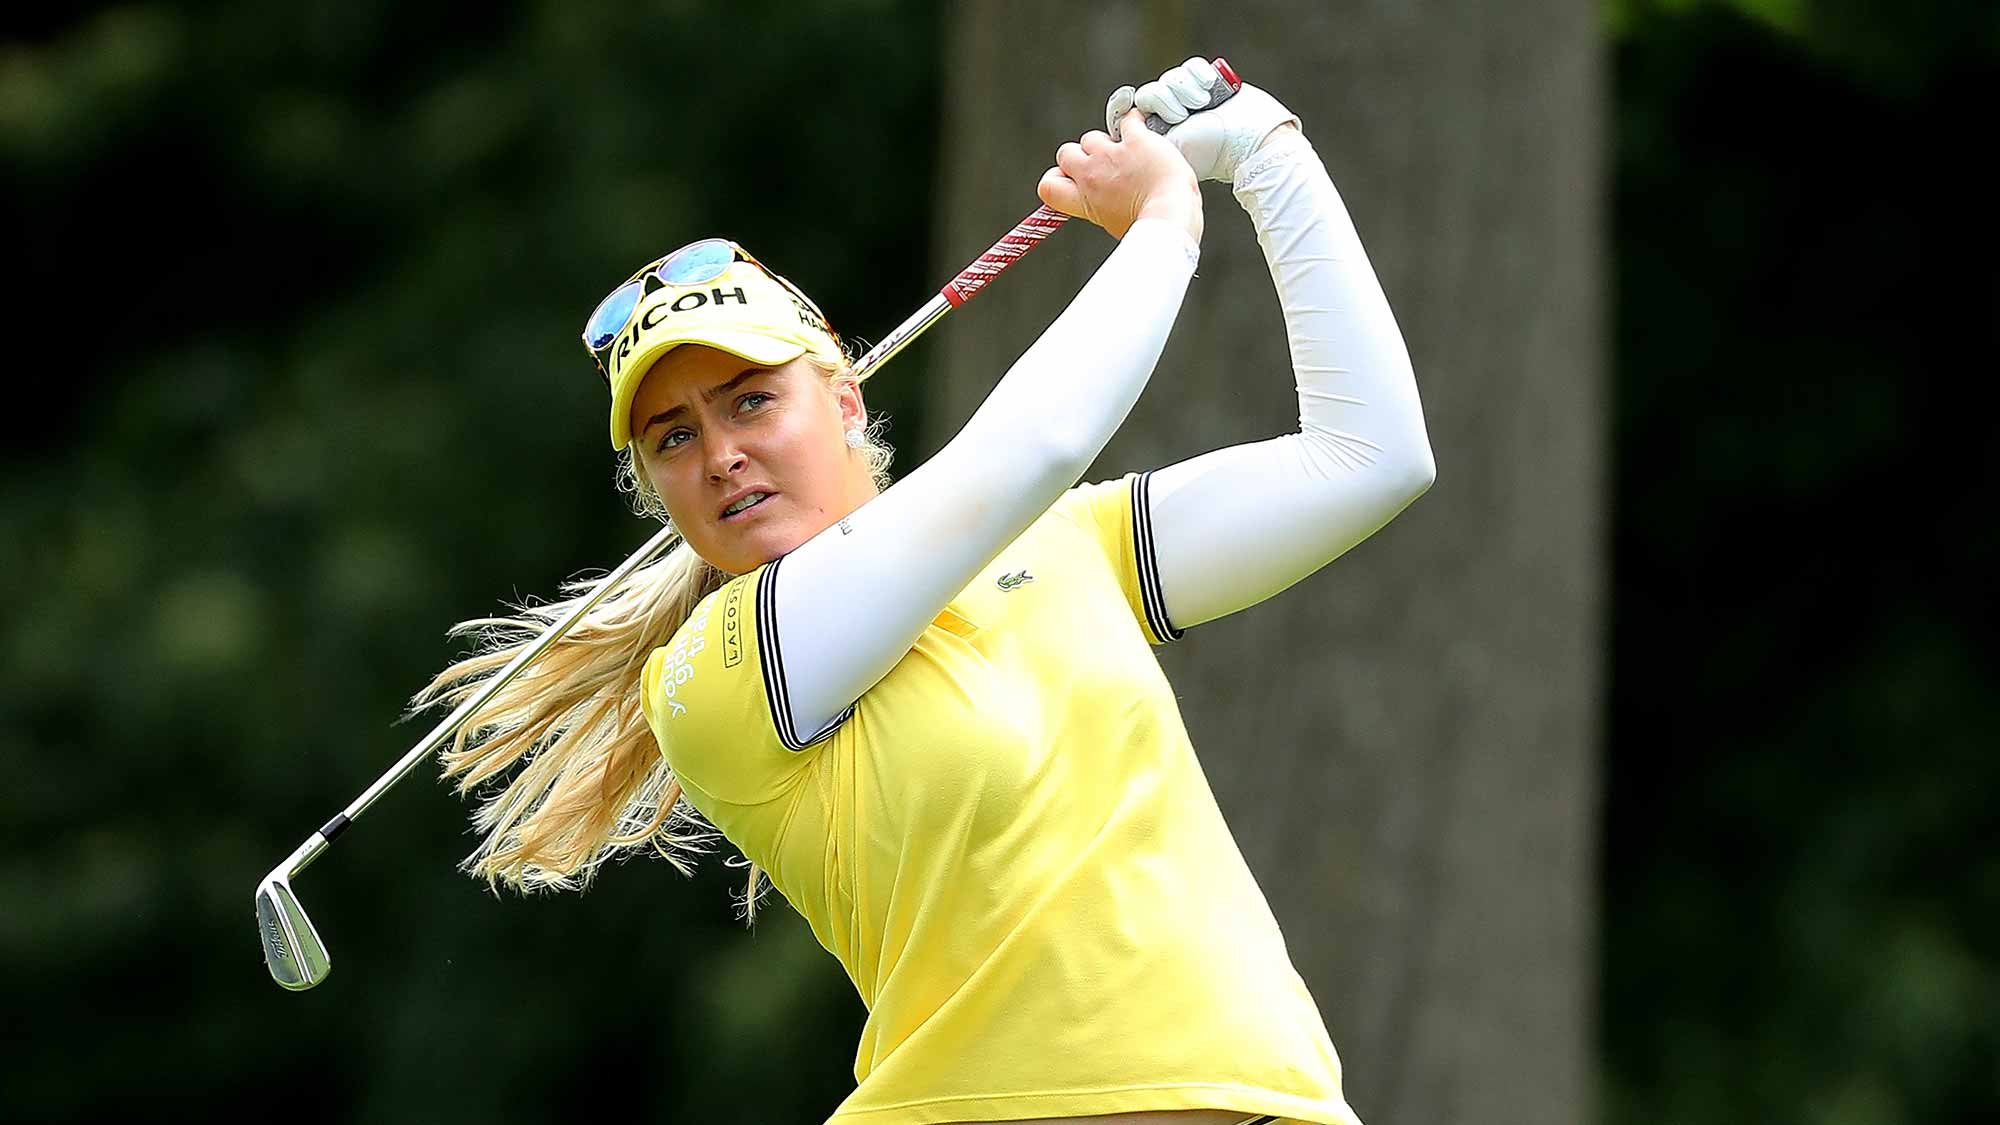 Charley Hull of England hits an approach shot during a Pro-Am round ahead of the Ricoh Women's British Open